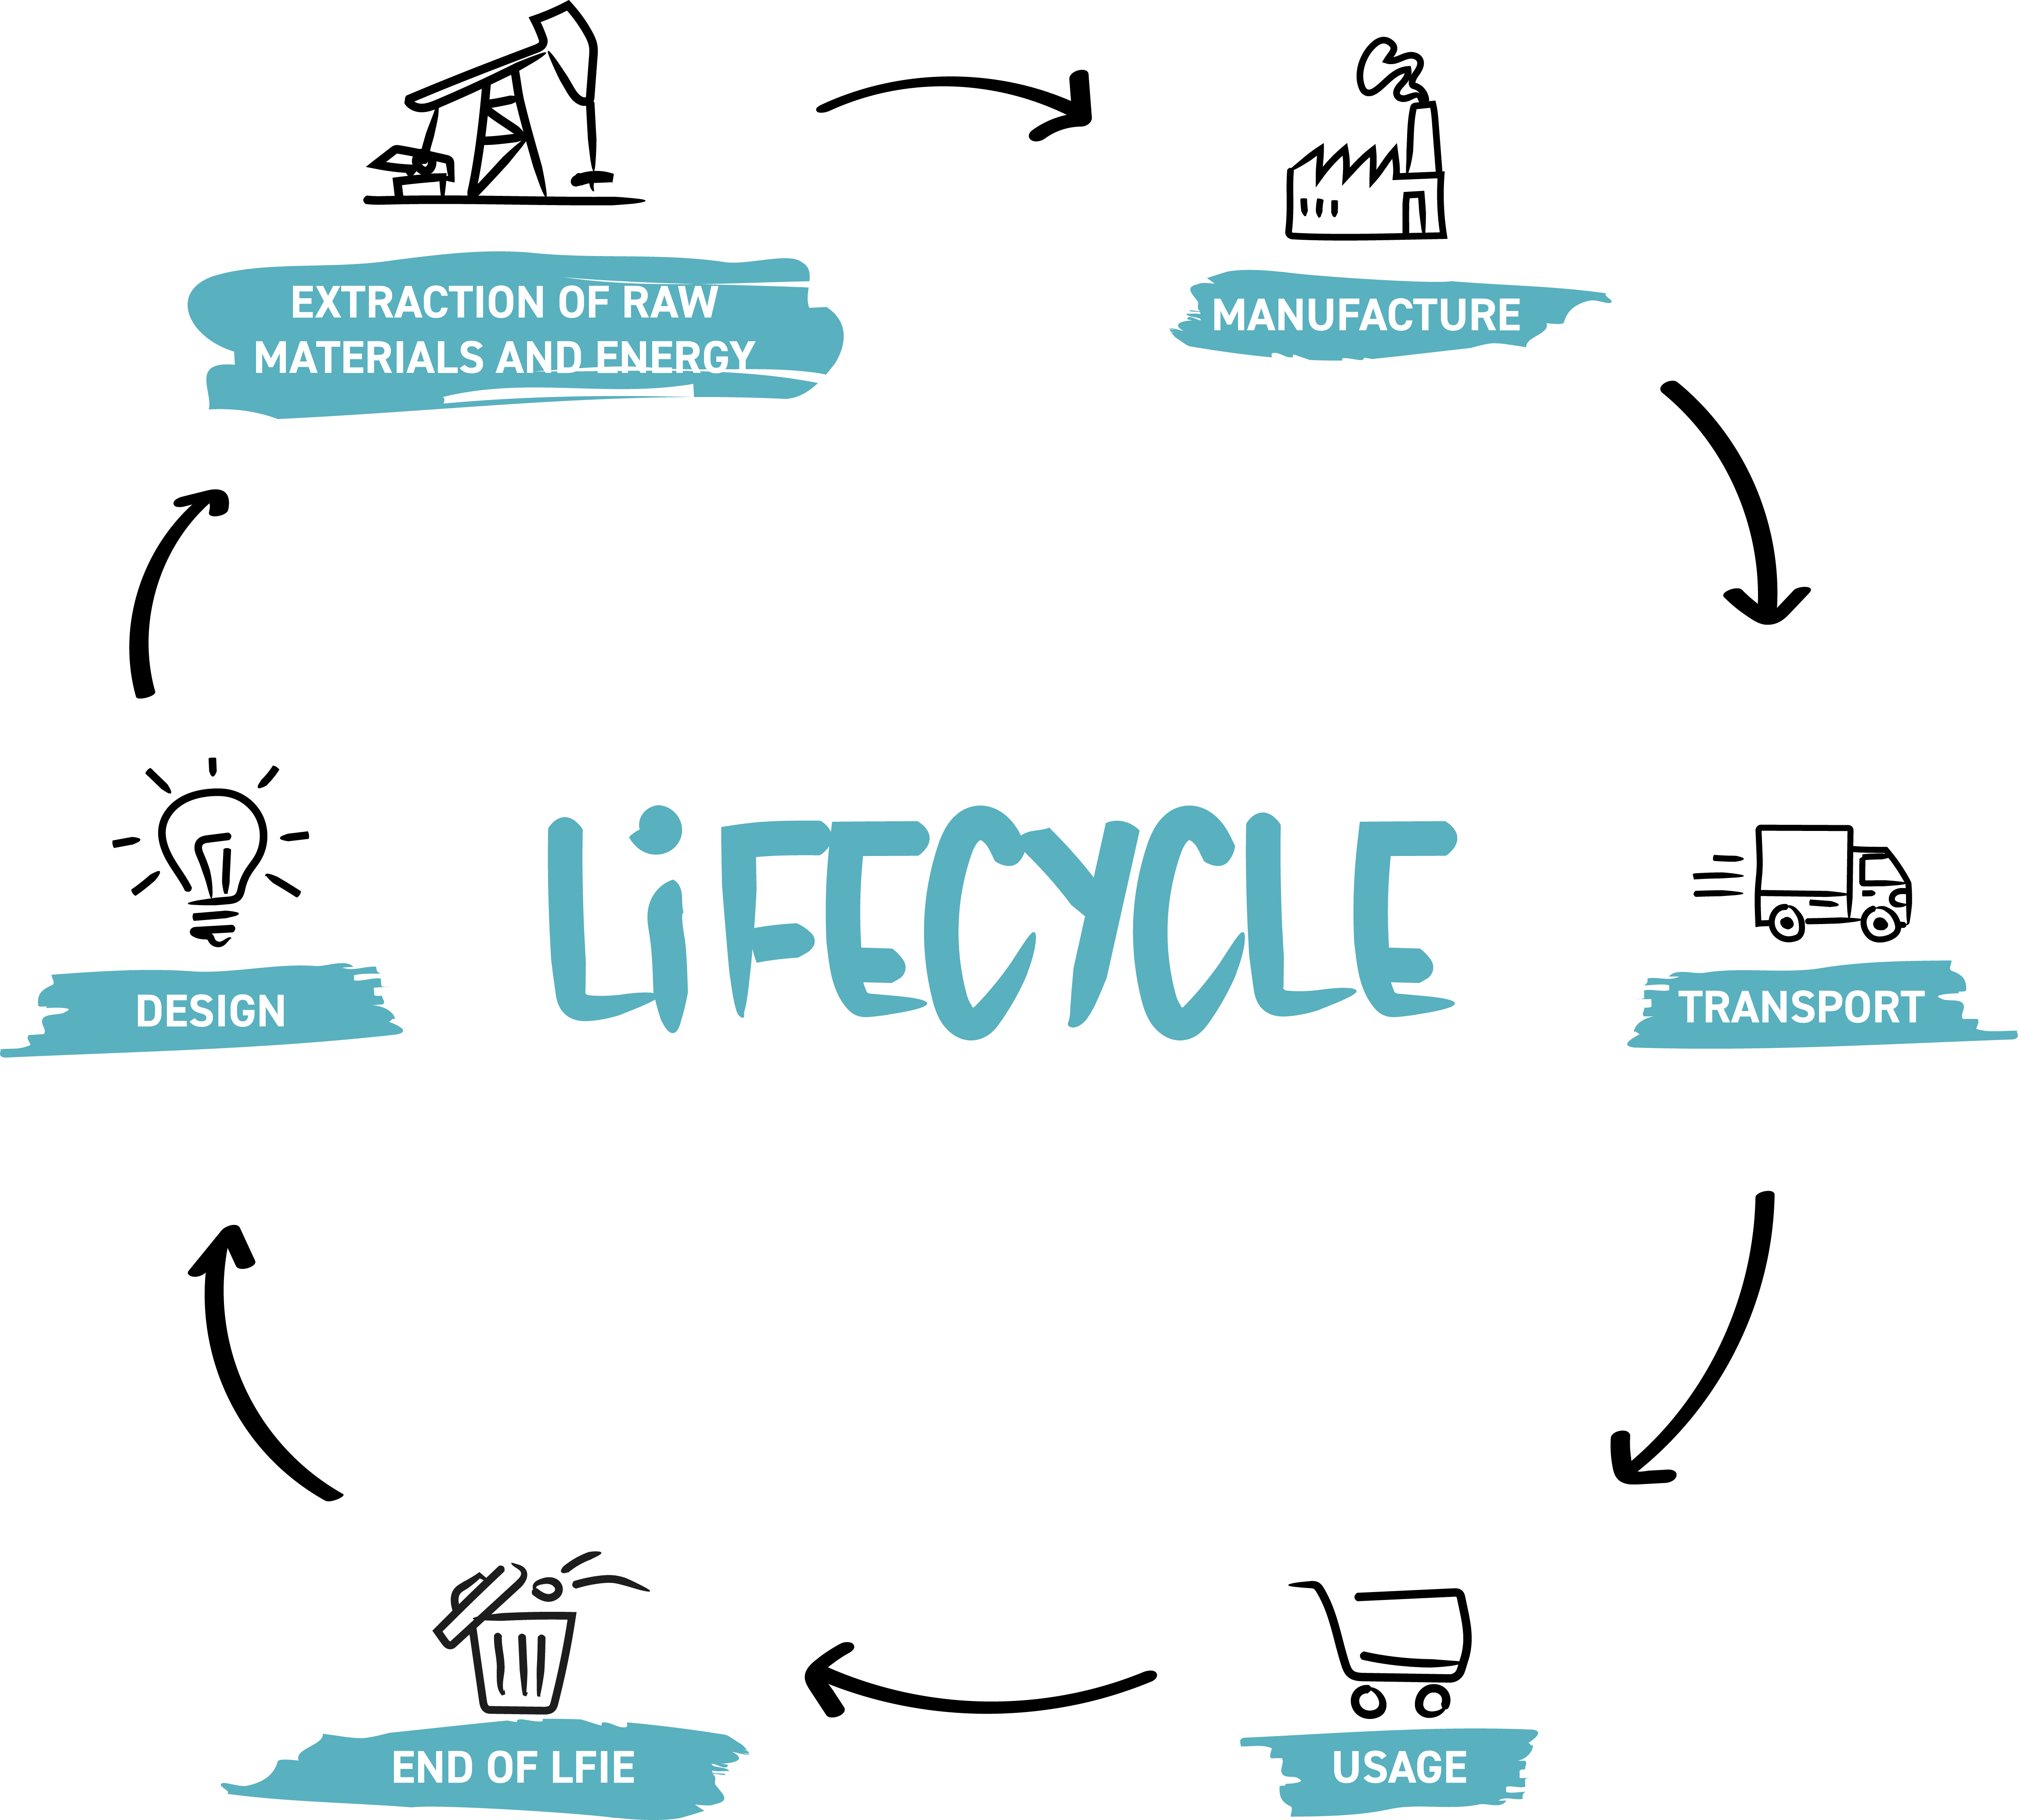 Life cycle of the products